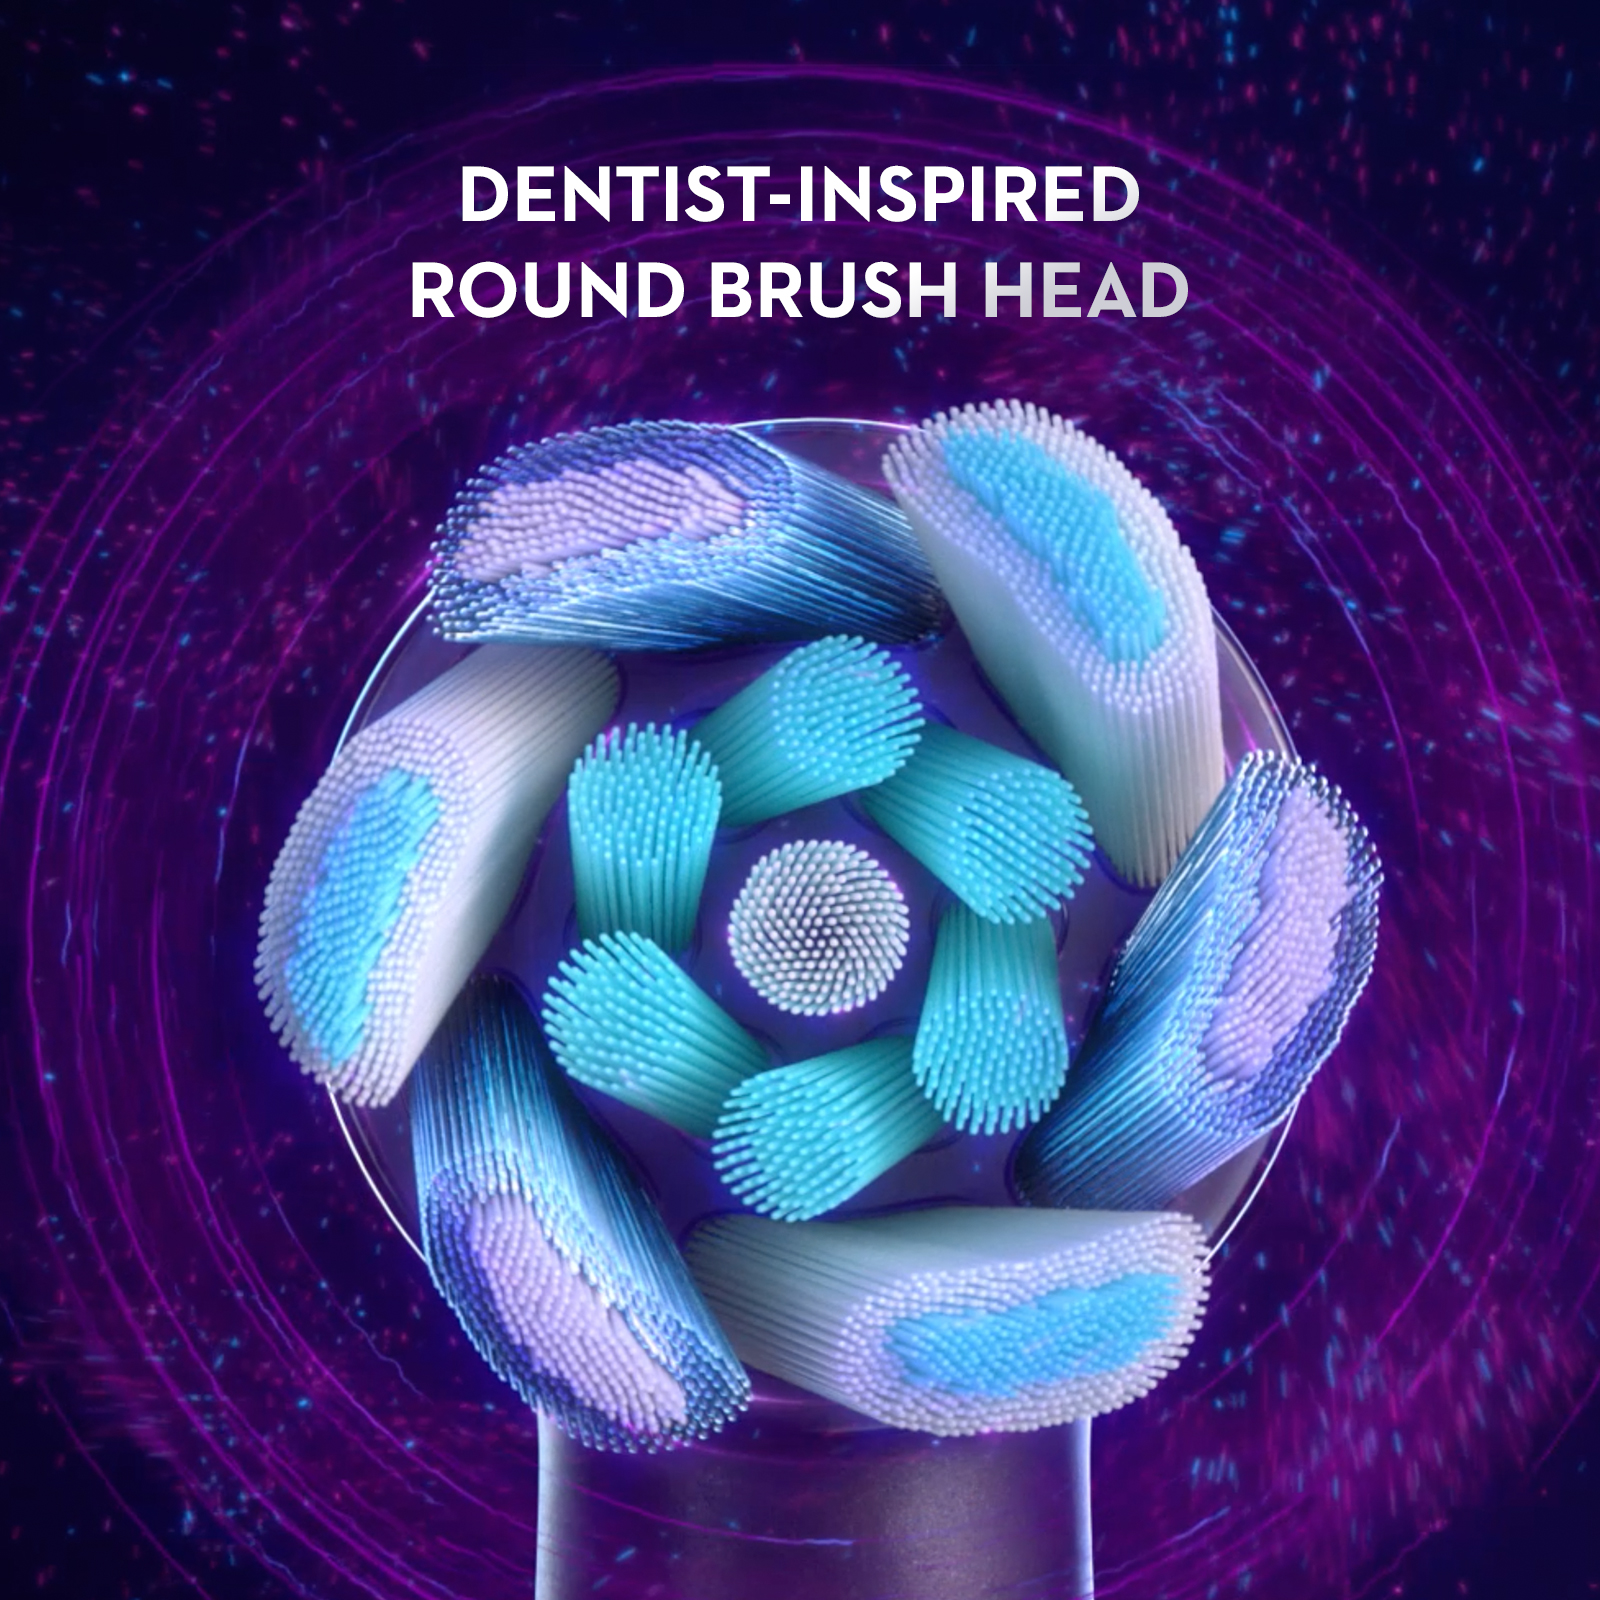 Oral-B iO Series 9 Electric Toothbrush with 4 Brush Heads, Rose Quartz - image 3 of 15